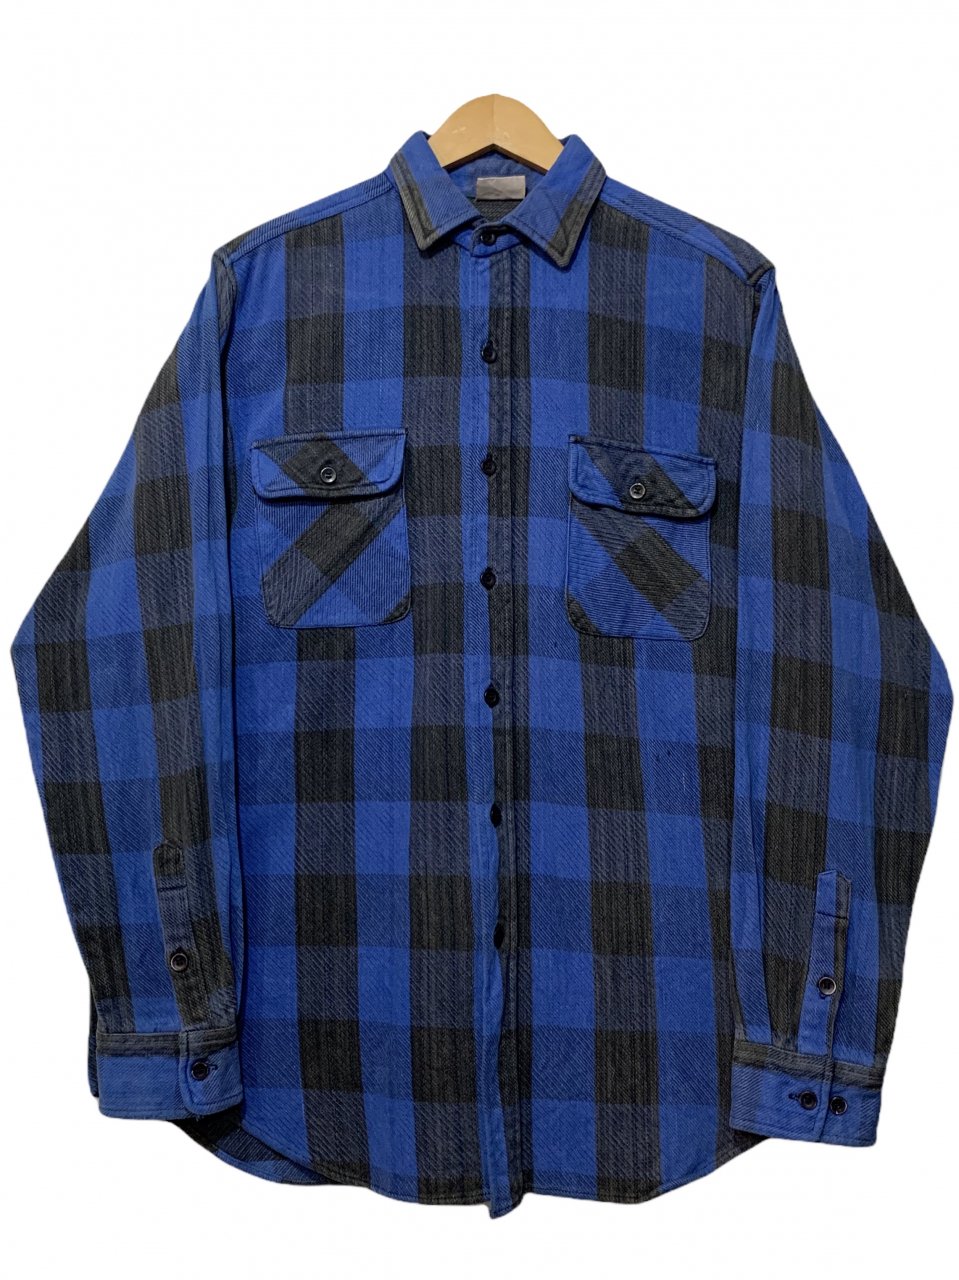 90s FIVE BROTHER Check Flannel L/S Shirt 青黒 M ファイブブラザー ...